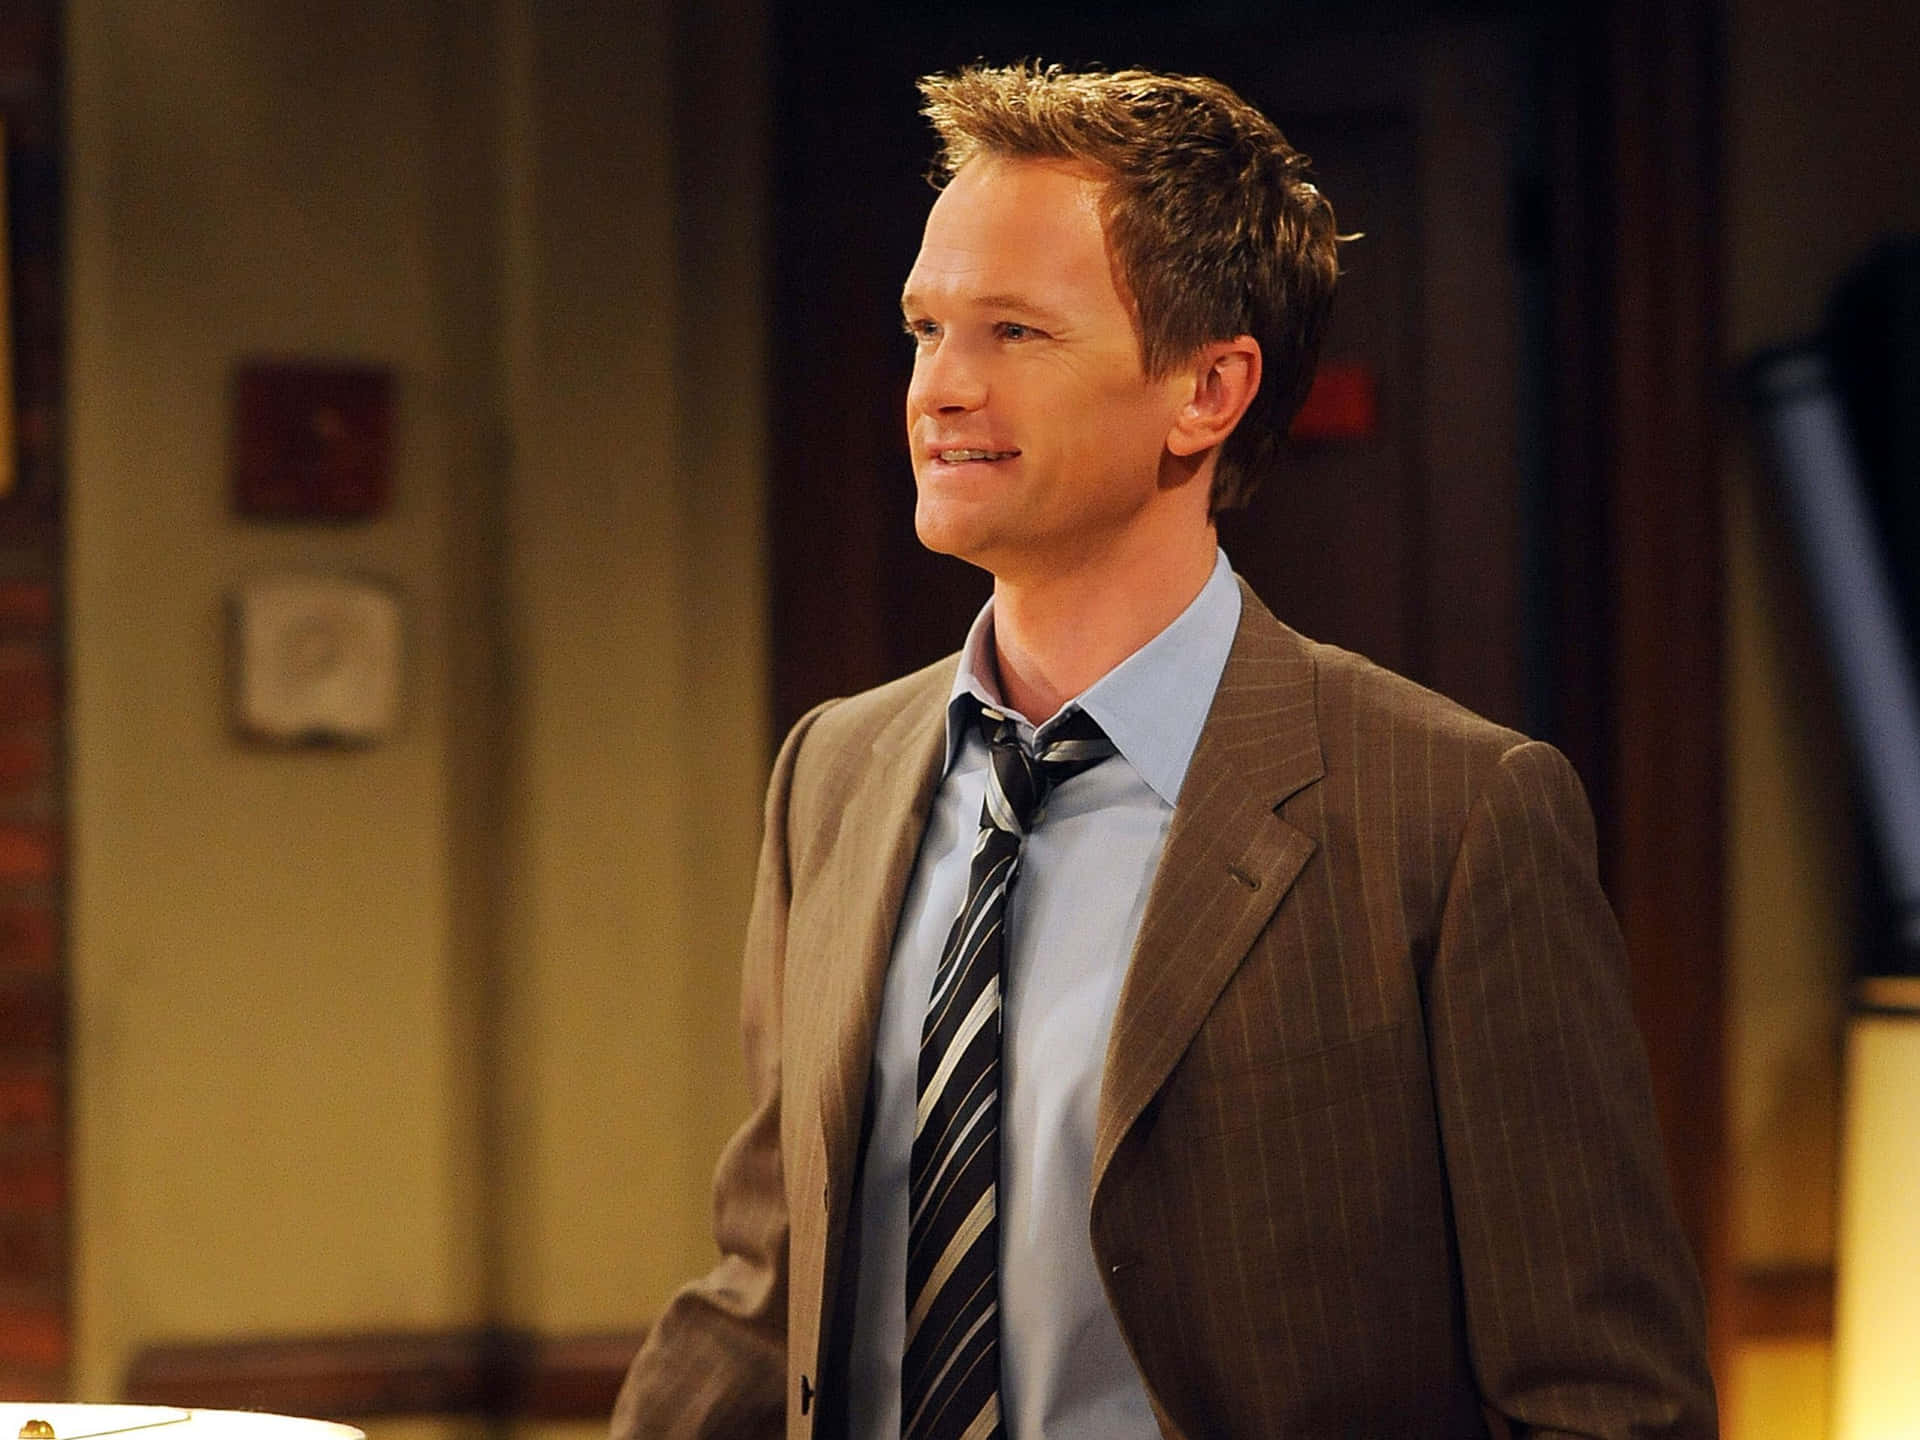 Actor Neil Patrick Harris is seen in a scene from the television show "How I Met Your Mother" Wallpaper